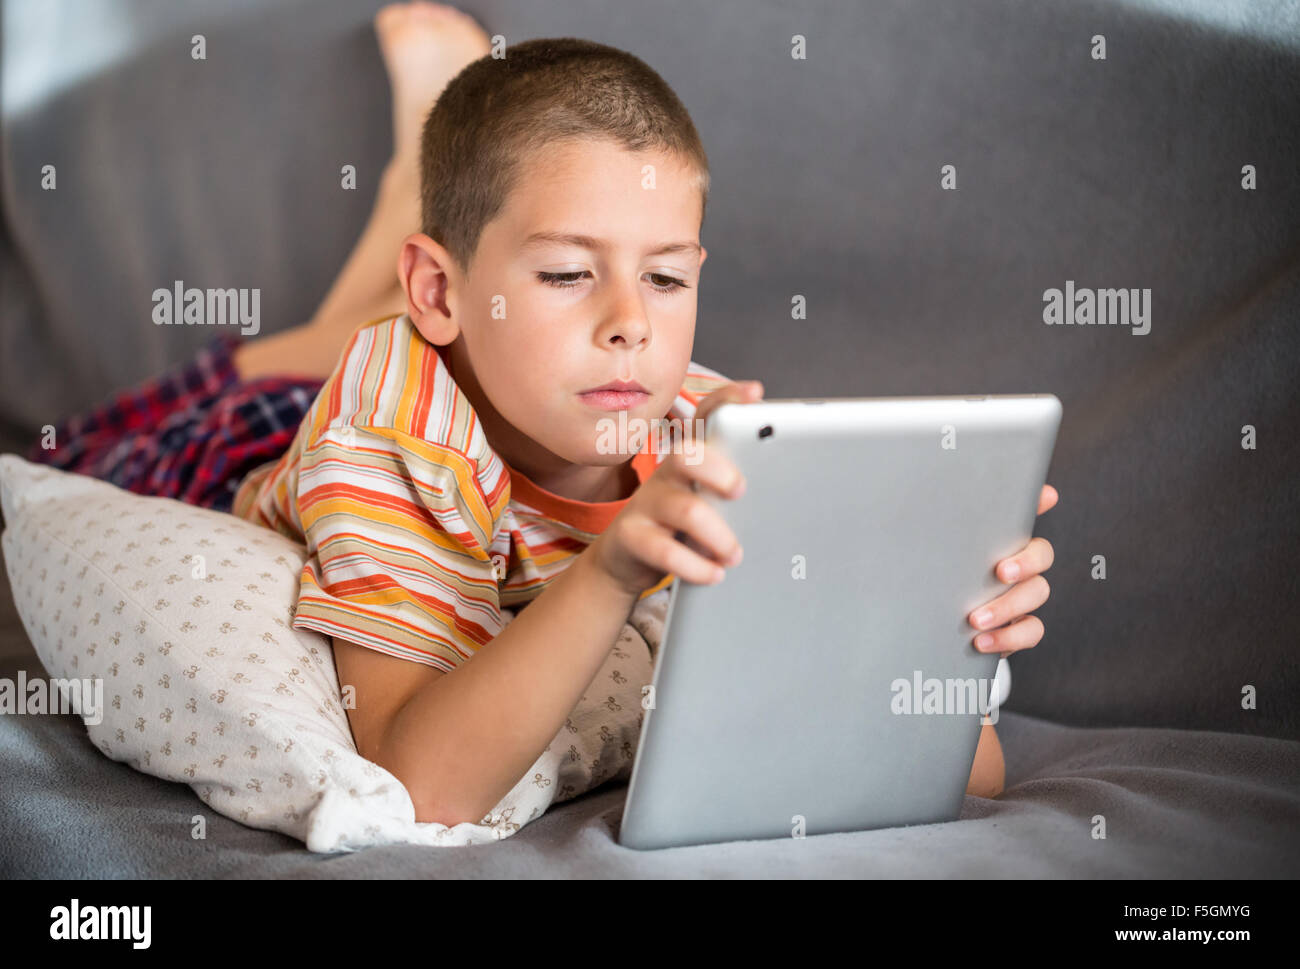 Boy playing with digital tablet Stock Photo